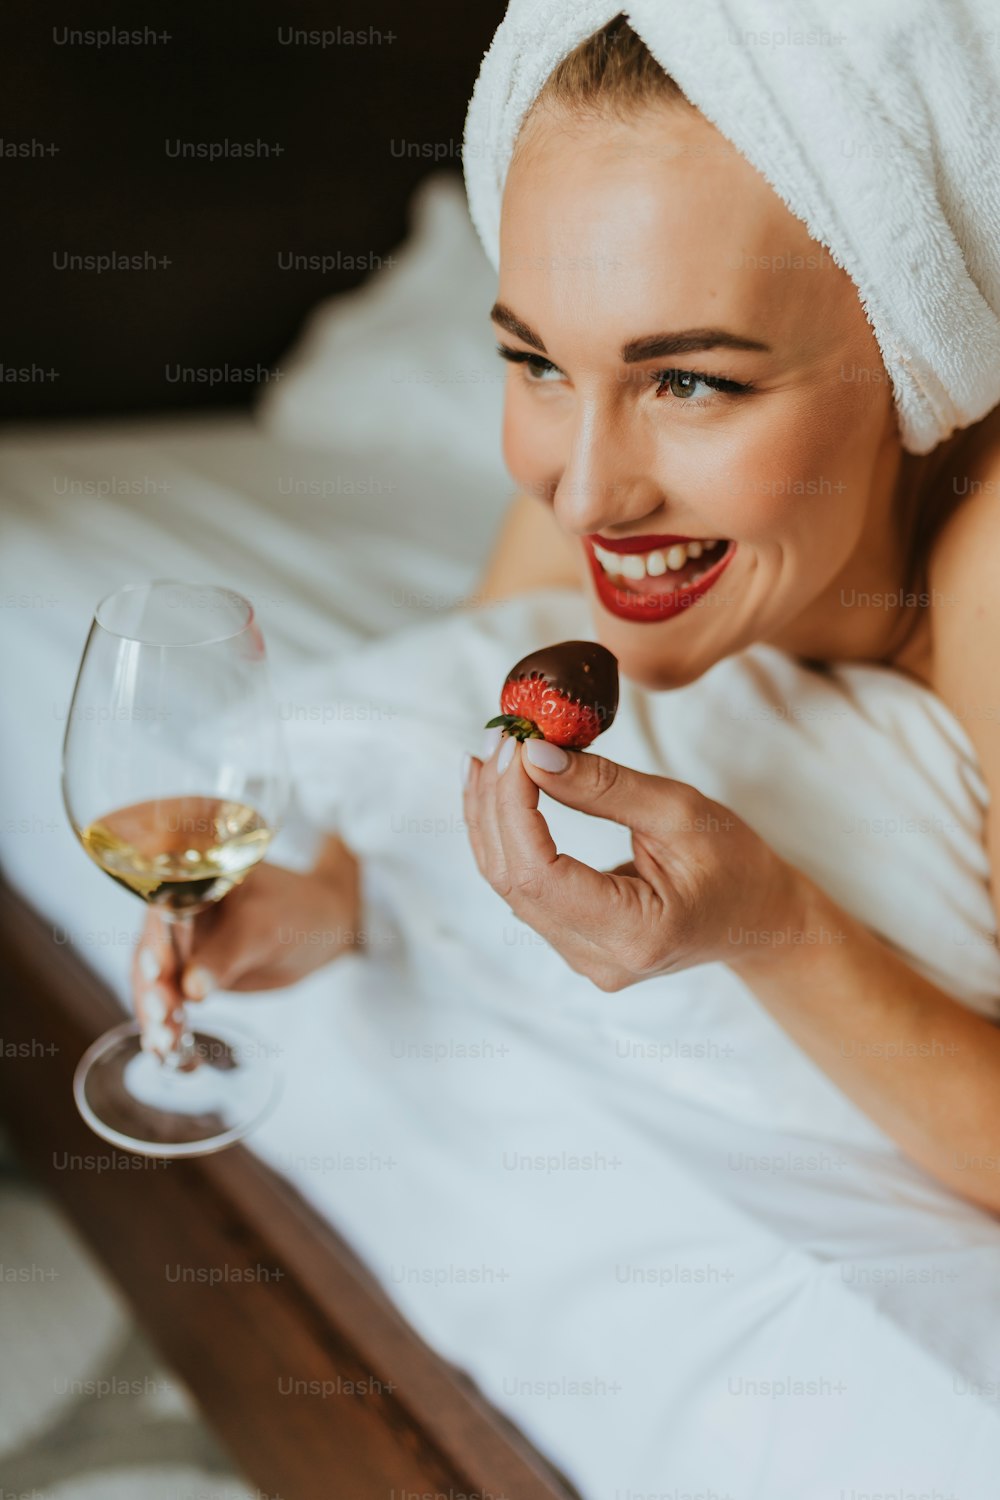 a woman with a towel on her head holding a strawberry and a glass of wine